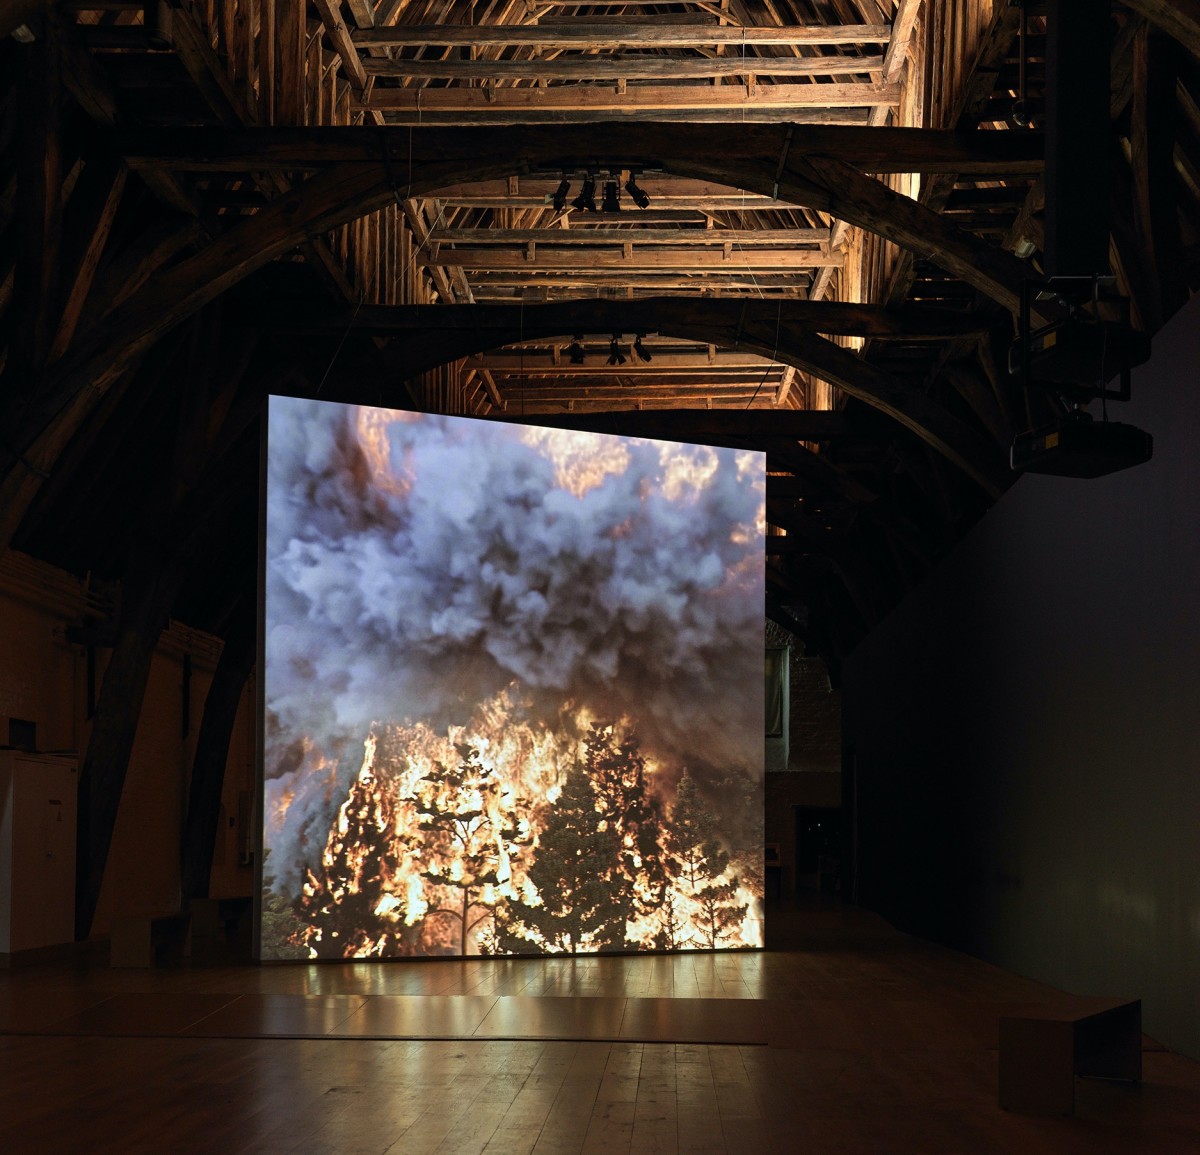 David Claerbout, Wildfire (meditation on fire), 2019-2020, single channel video projection, 3D animation (stereo audio, color), duration: 24 min, edition of 7. Exhibition view: Memling Now: Hans Memling in contemporary art, Sint Janshospitaal, Bruges, 2020. Collection Musea Brugge. Photo © Dominique Provost